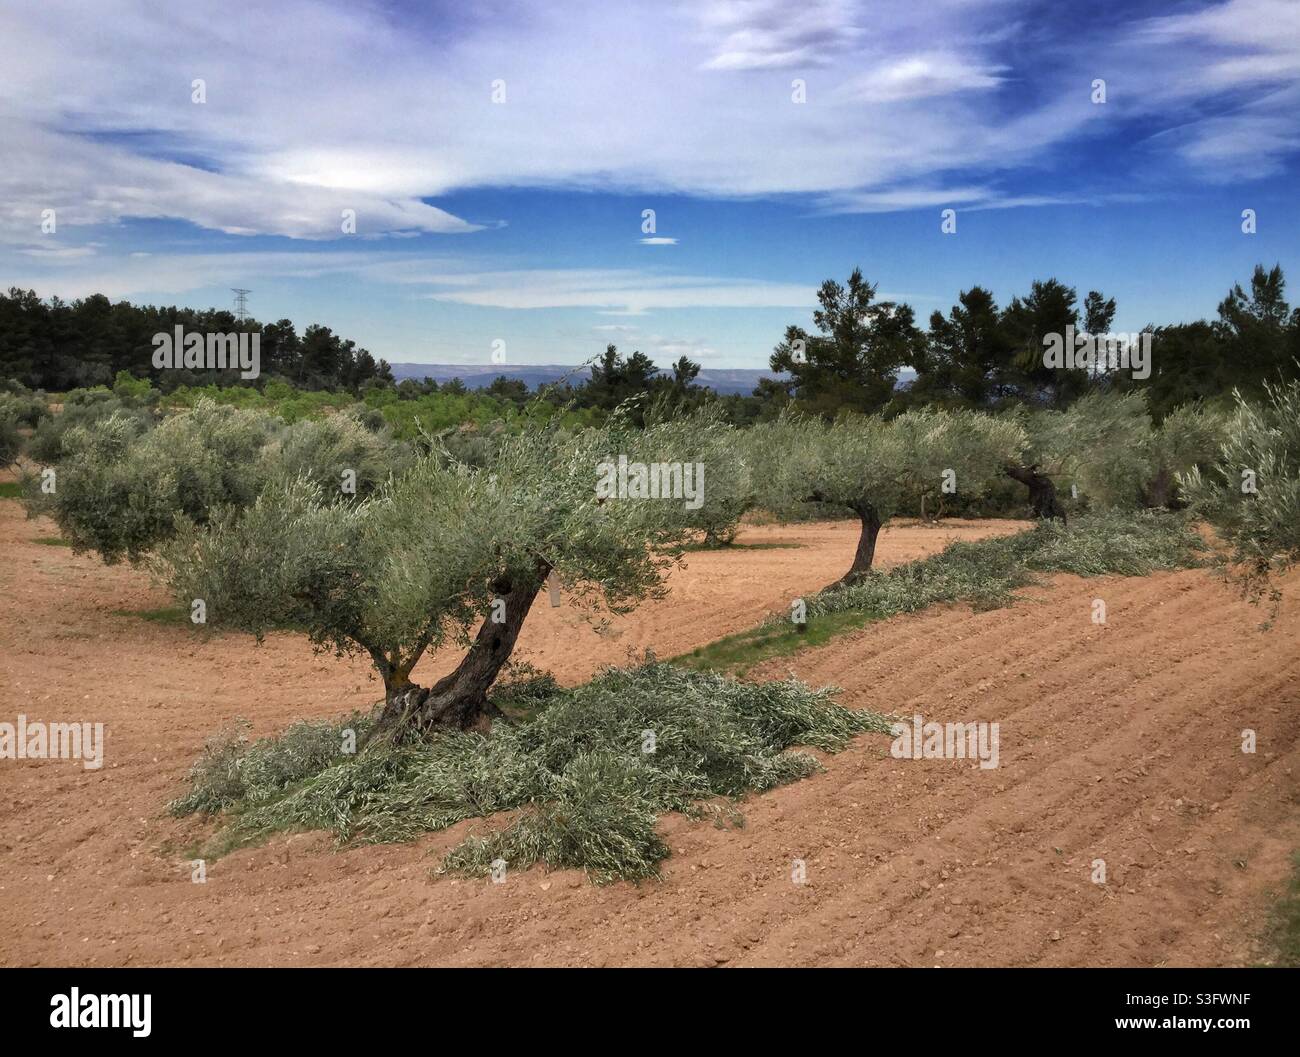 Pruning olive trees, Catalonia, Spain. Stock Photo